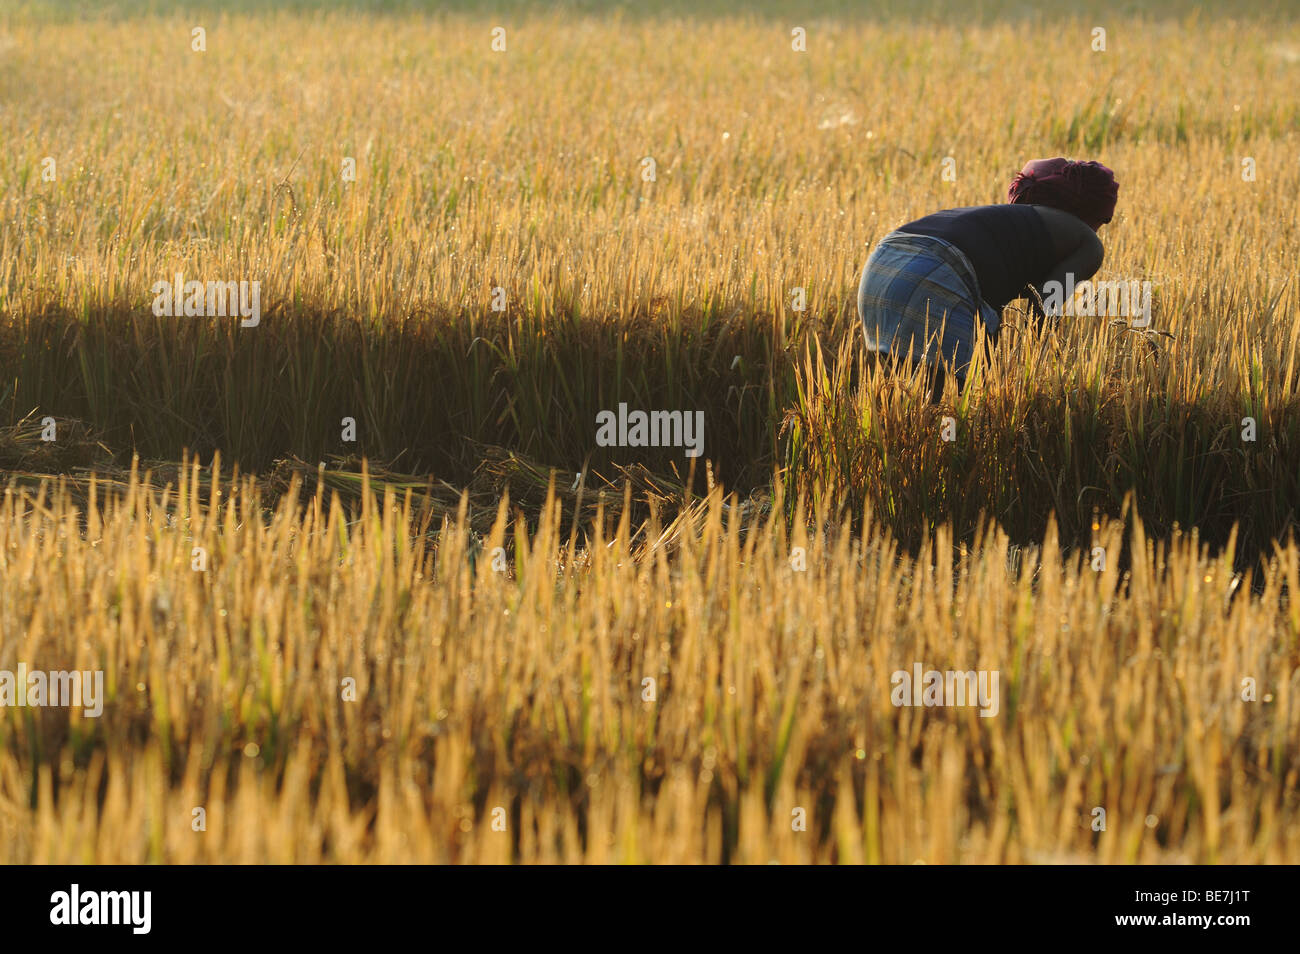 Harvest of a paddy field Stock Photo